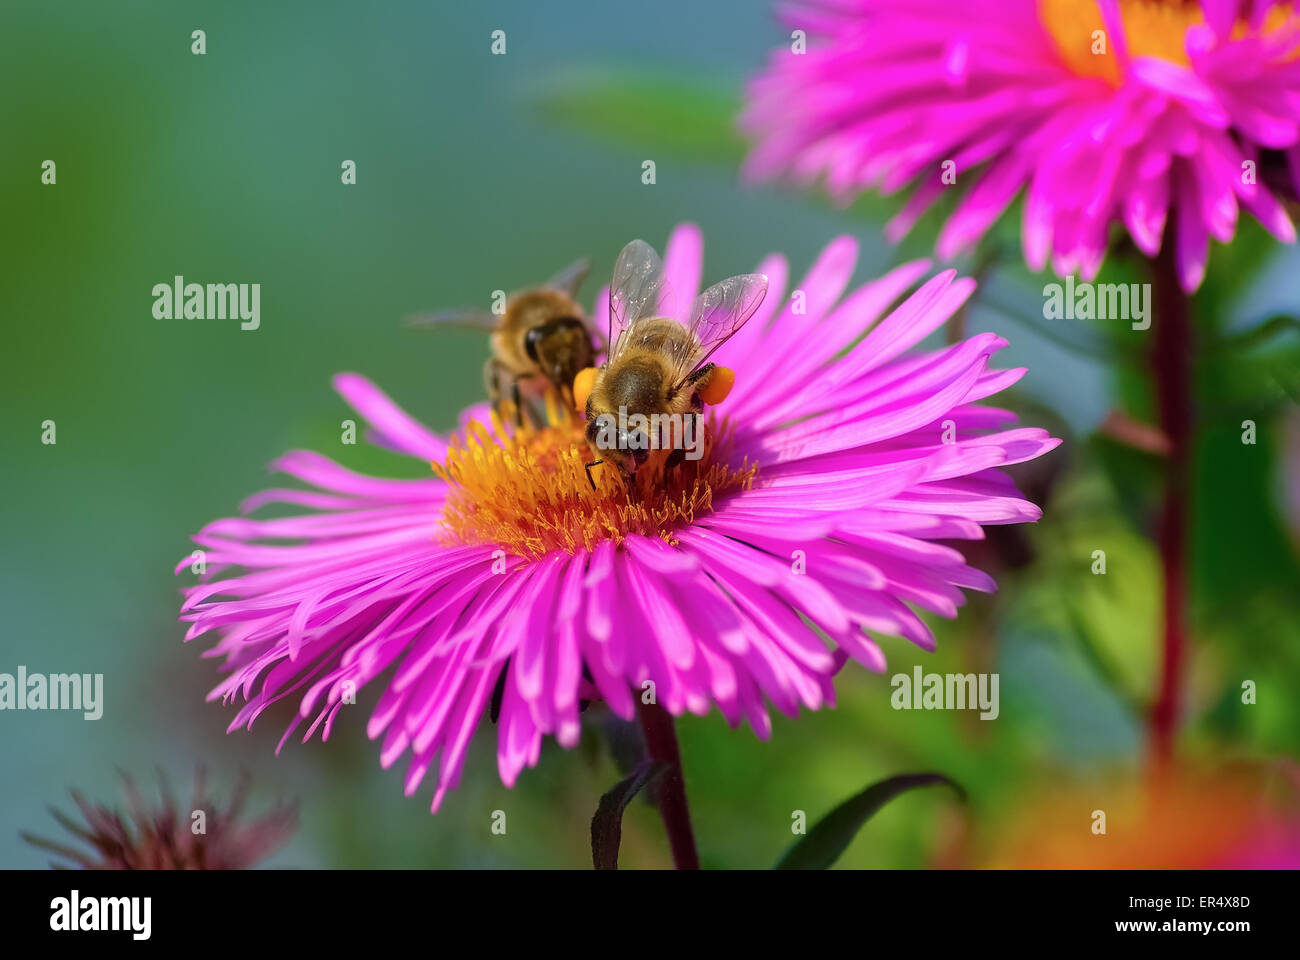 Bees on a pink Michaelmas daisy. Pollination of the flower. Shallow depth of field. Selective focus. Stock Photo